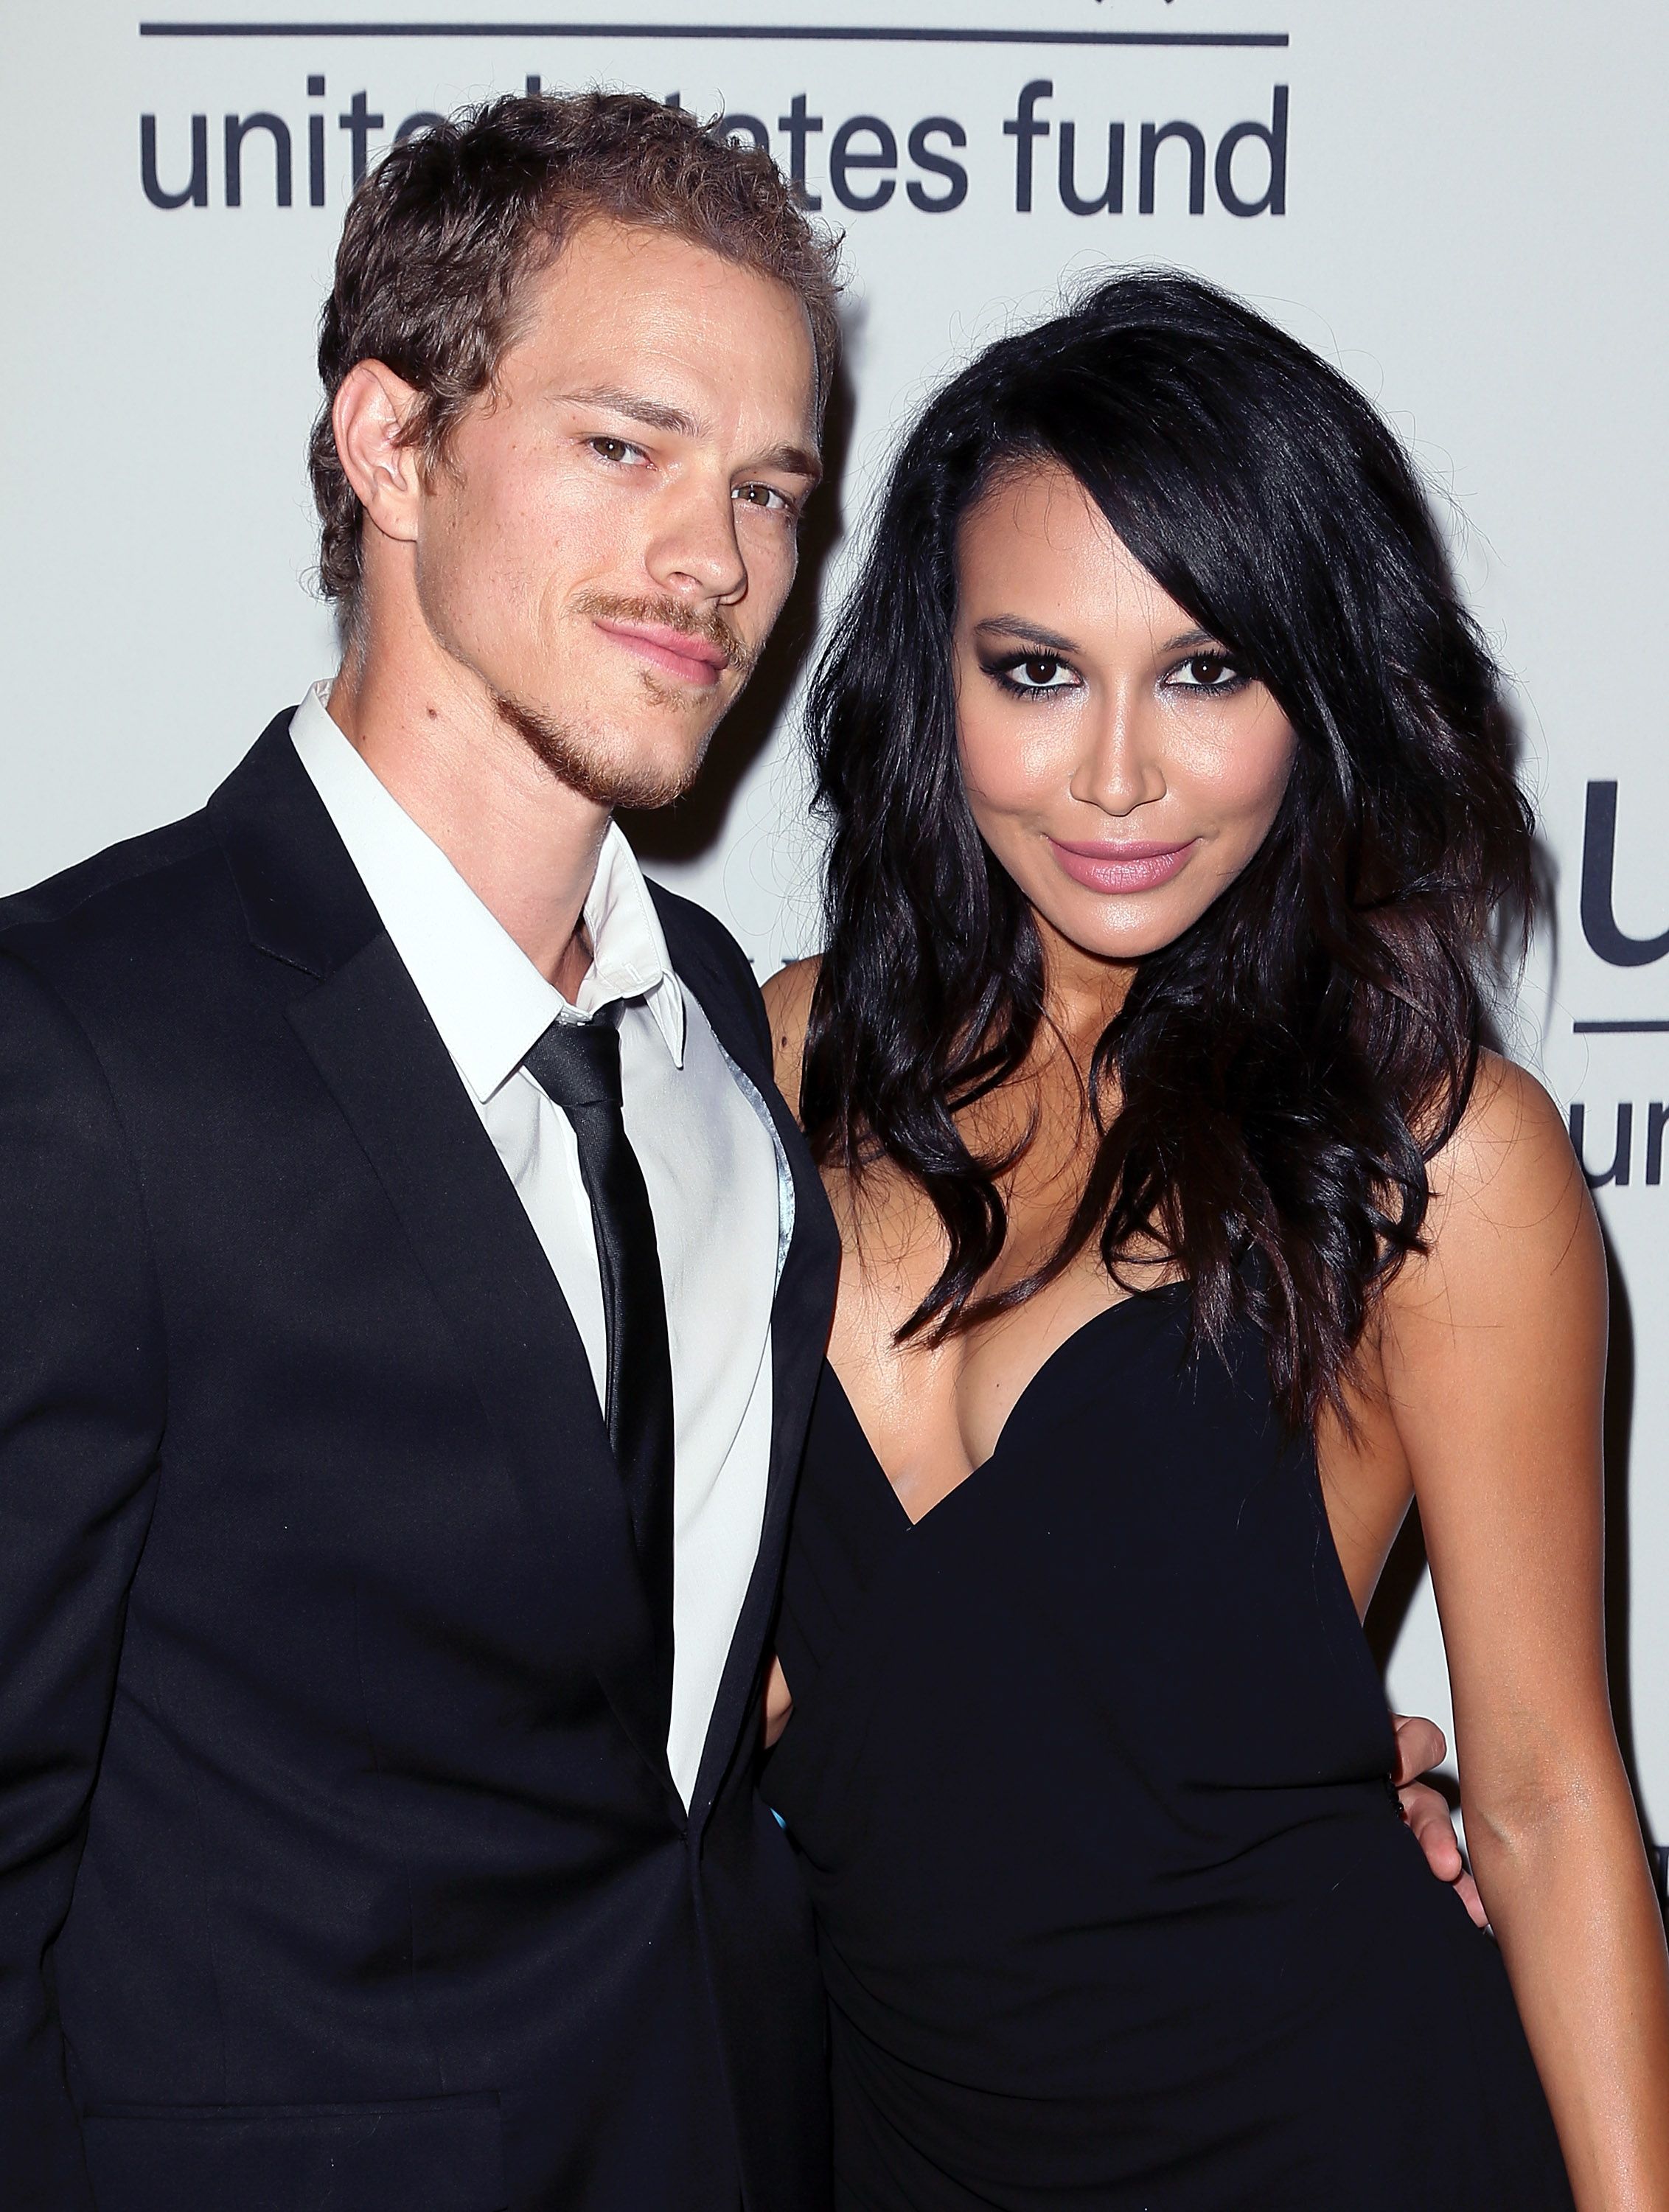 Ryan Dorsey and the late Naya Rivera at the UNICEF's Next Generation's 2nd Annual UNICEF Masquerade Ball at Hollywood Forever Cemetery on October 30, 2014 | Photo: Getty Images